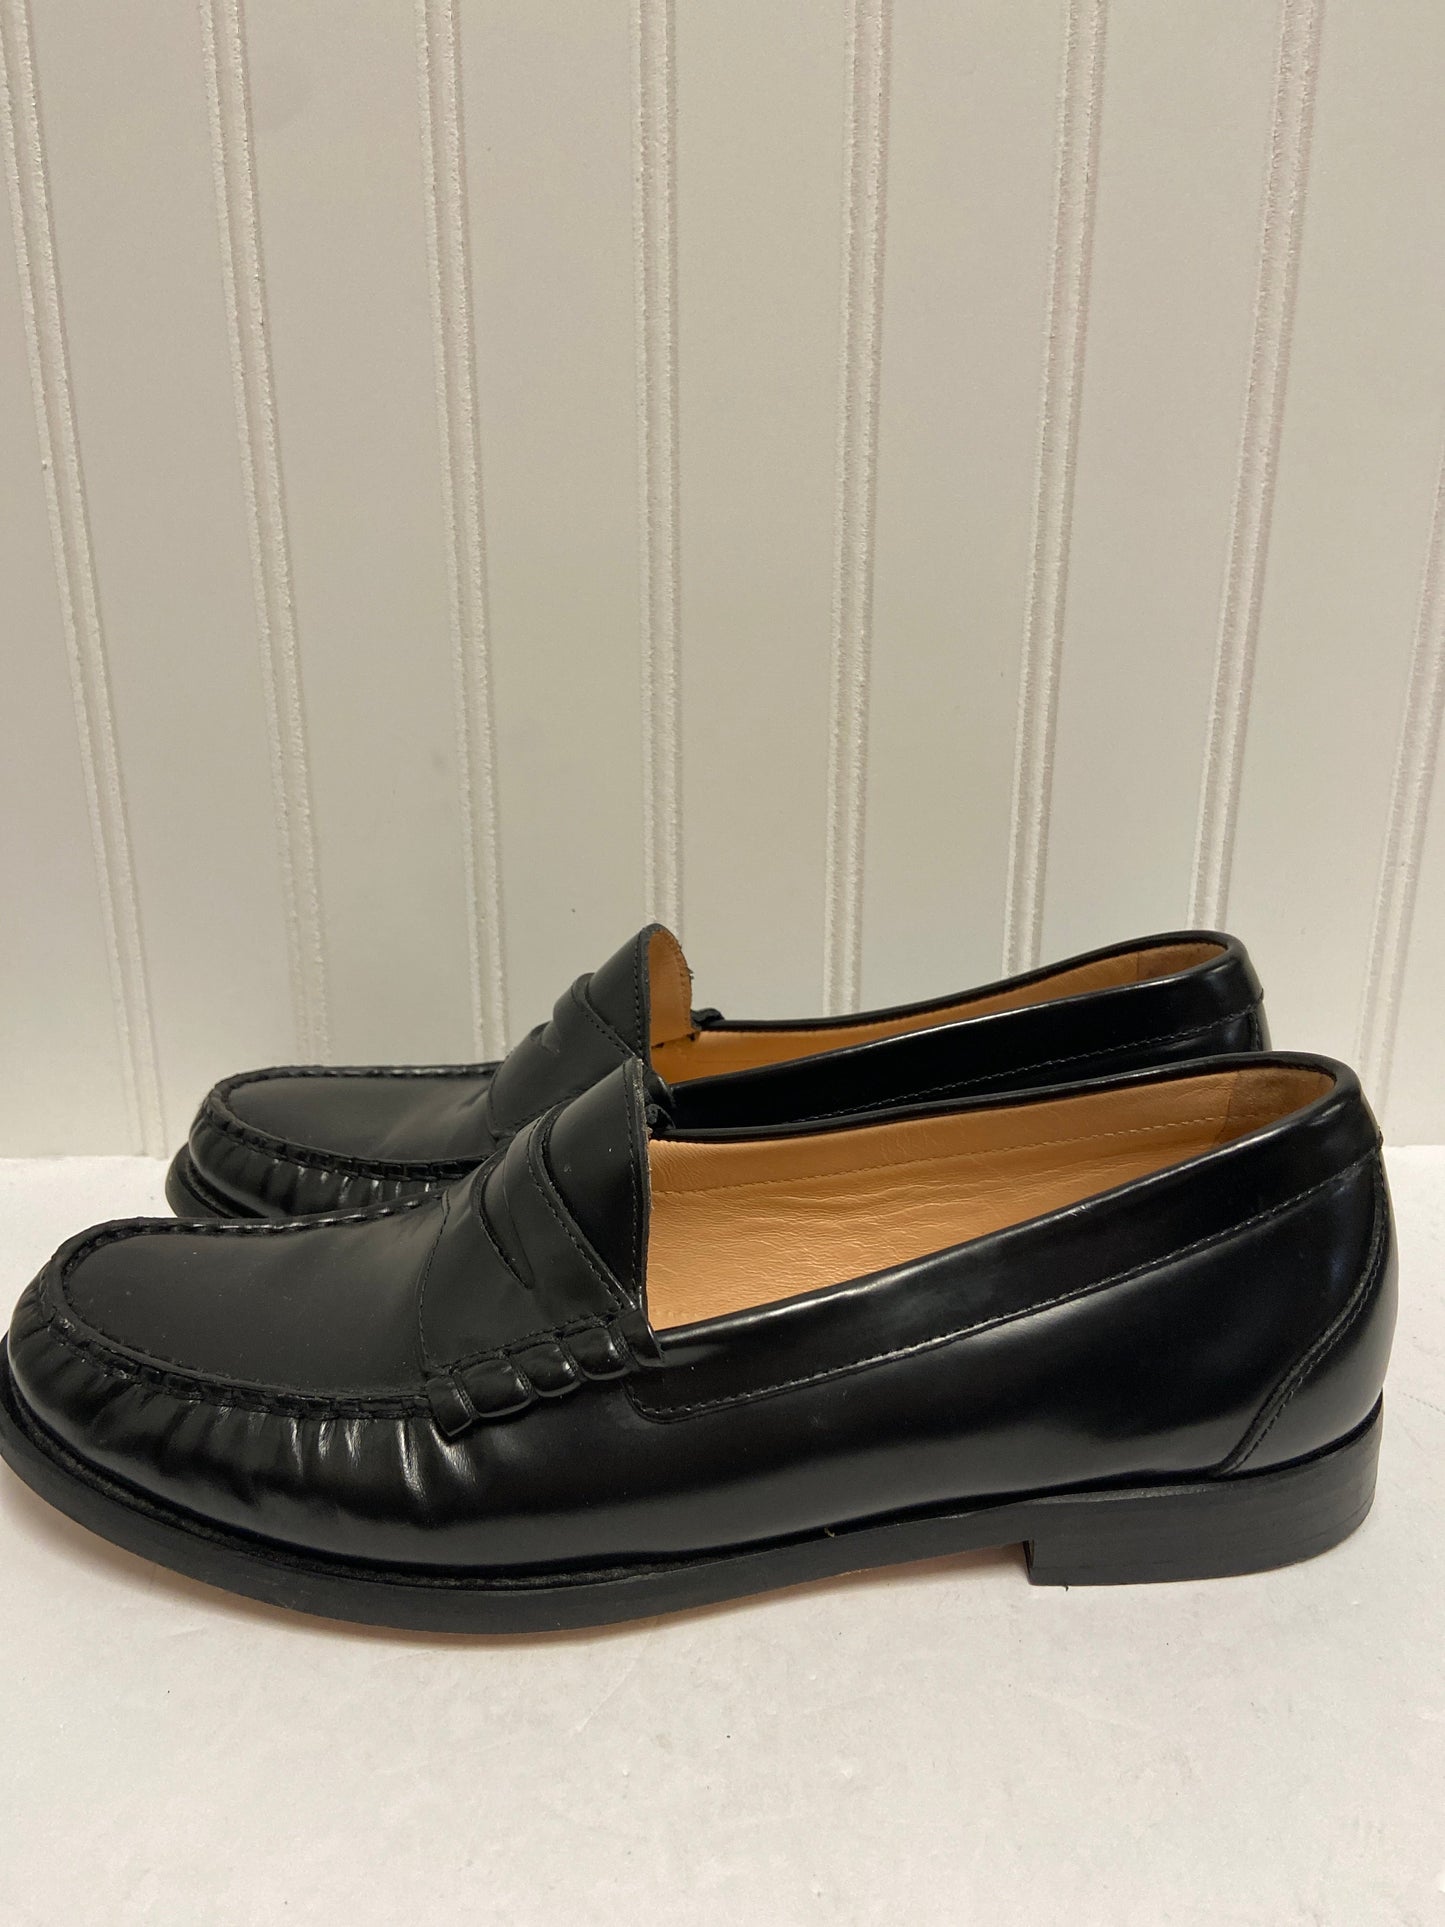 Shoes Flats By J. Crew  Size: 9.5